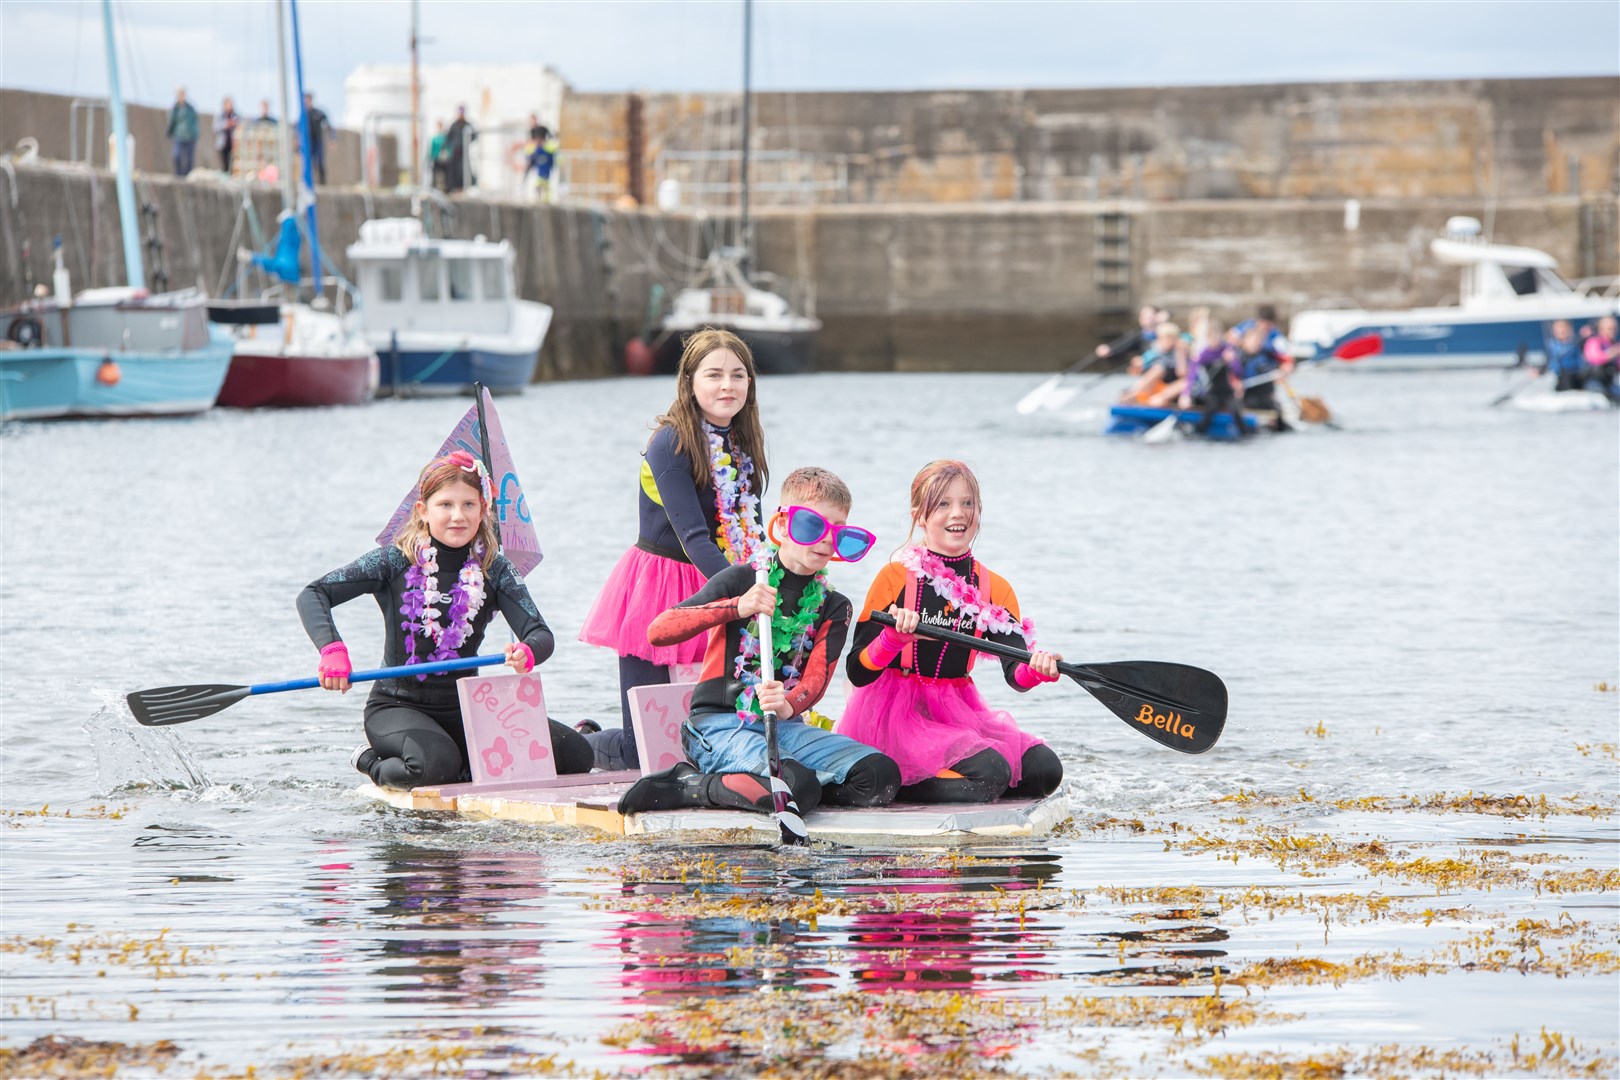 Winners of the raft race are 'The Fab Four' (from left) Bella Robertson, Merryn King, Mackintosh Ralph and Naomi Erker. Picture: Daniel Forsyth